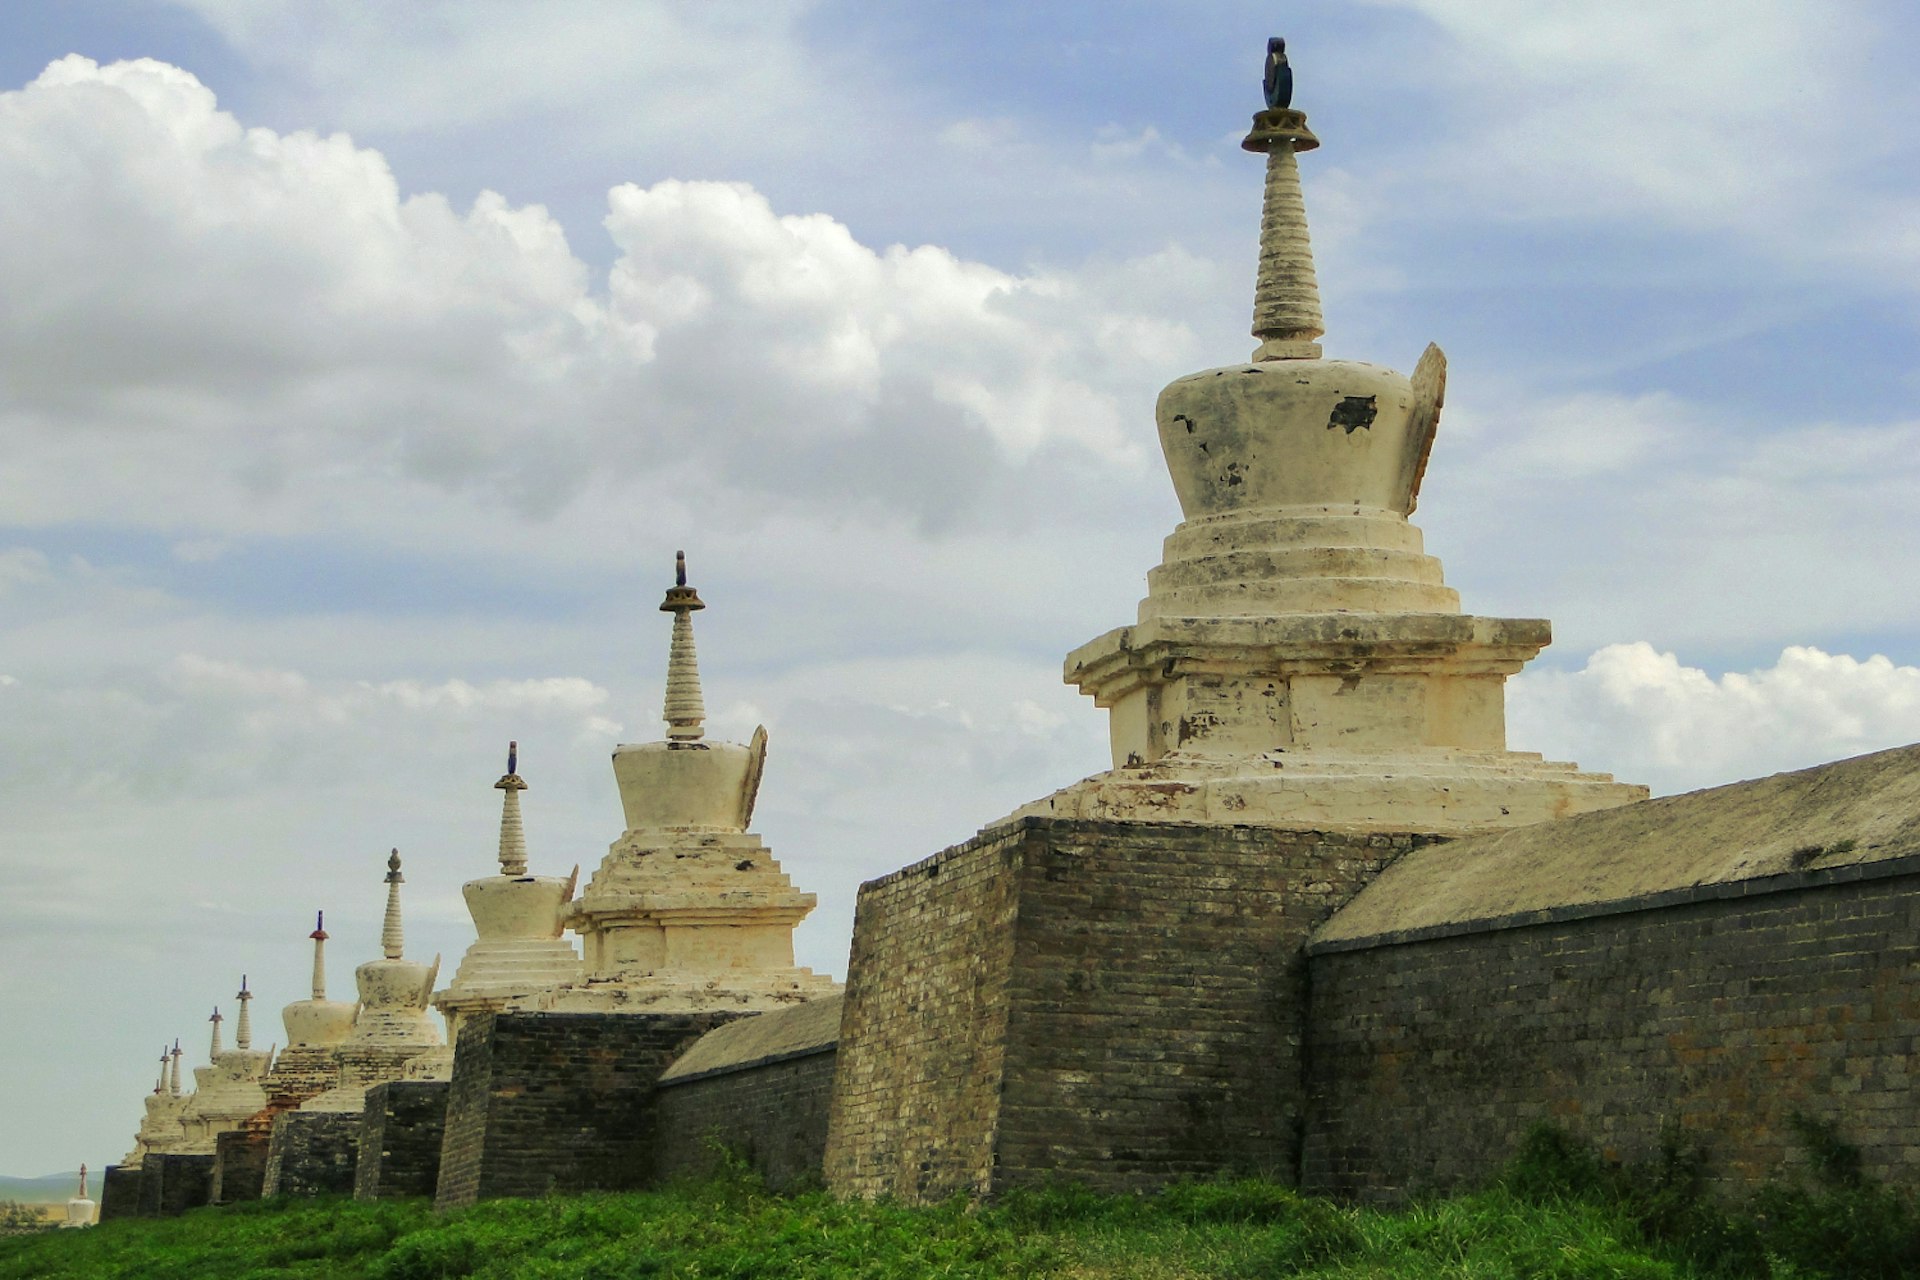 Erdene Zuu Khiid is considered the most important monastery in Mongolia today. Image by Stephen Lioy / Lonely Planet